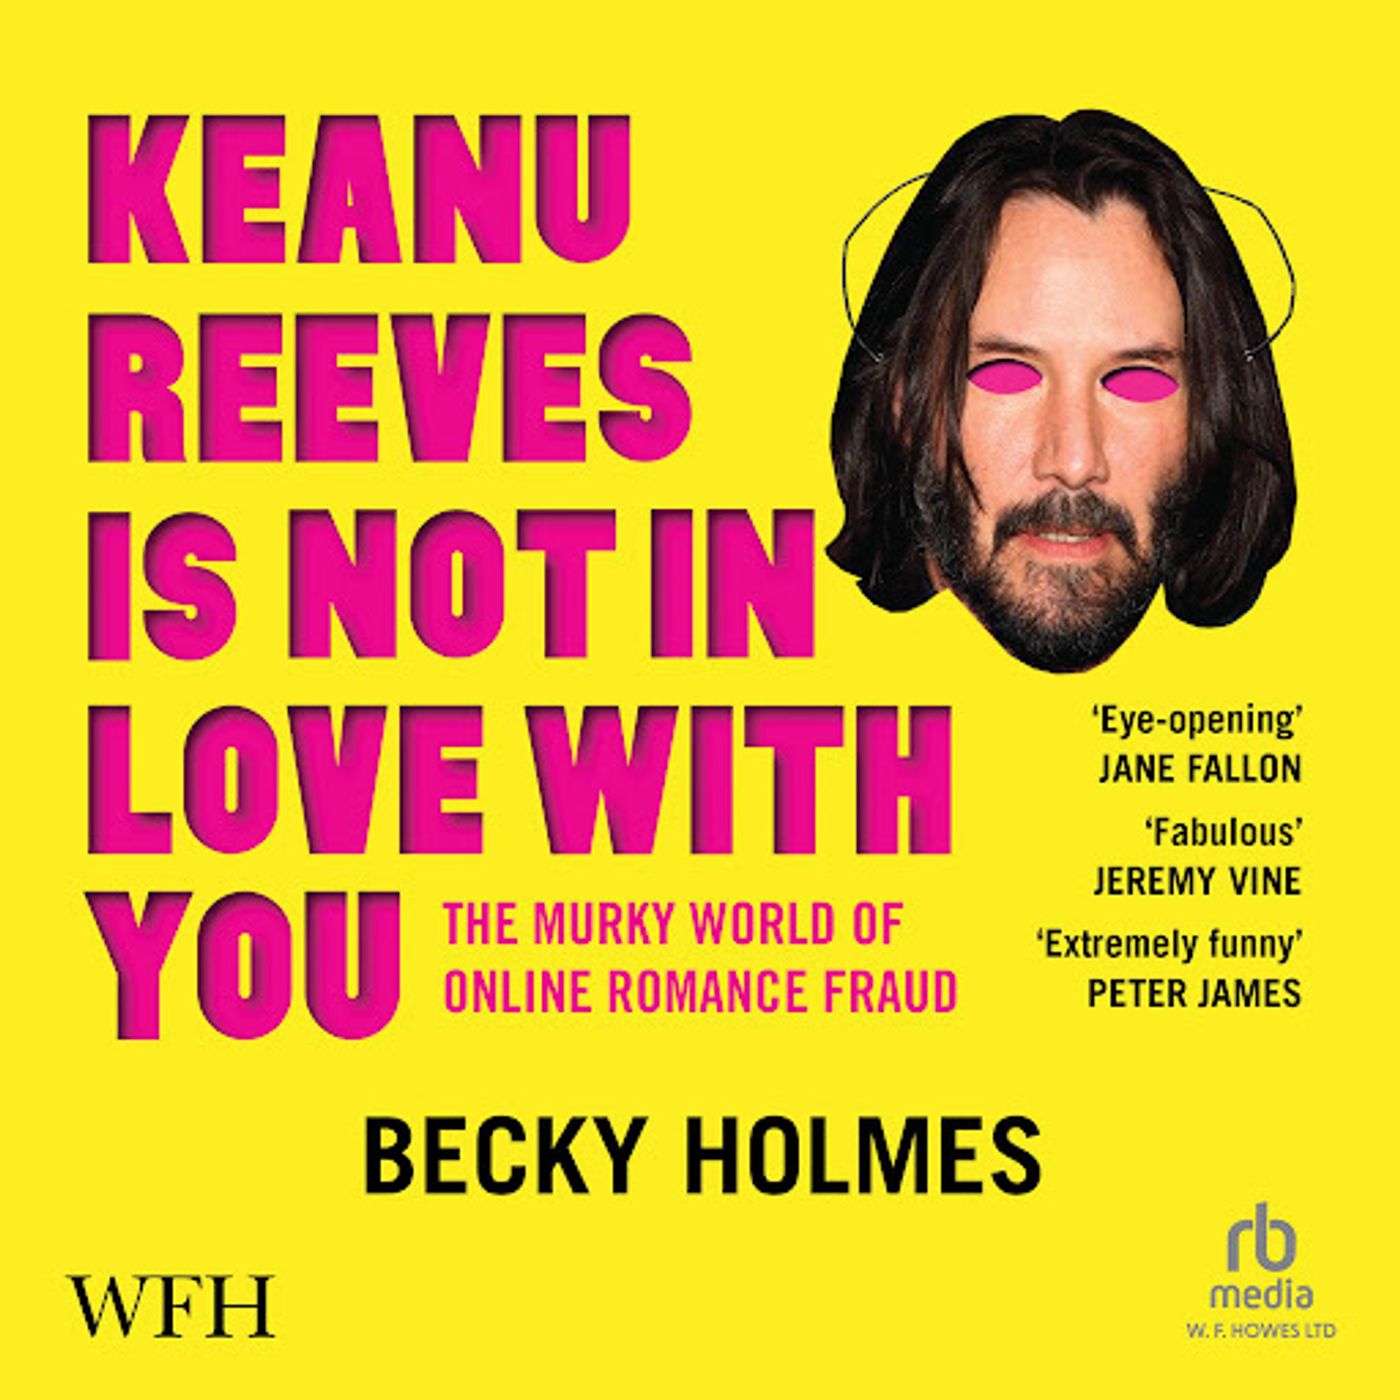 361: Becky Holmes - Keanu Reeves is Not In Love With You